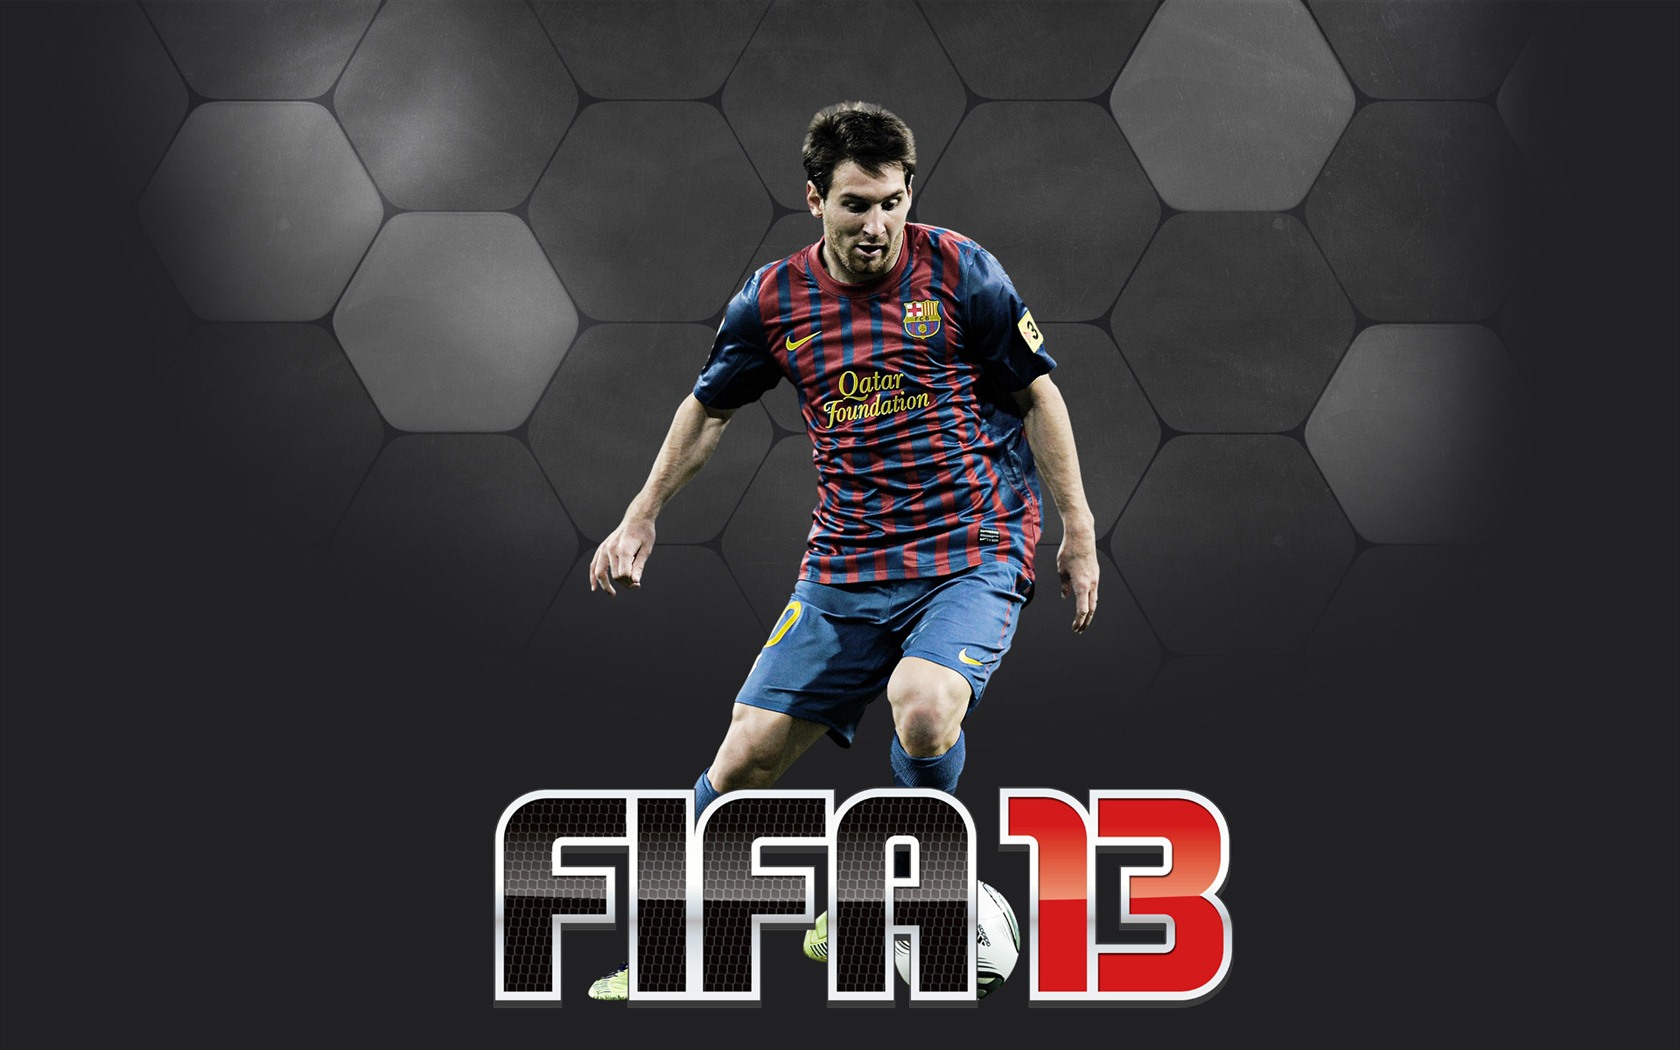 FIFA 13 game HD wallpapers #6 - 1680x1050